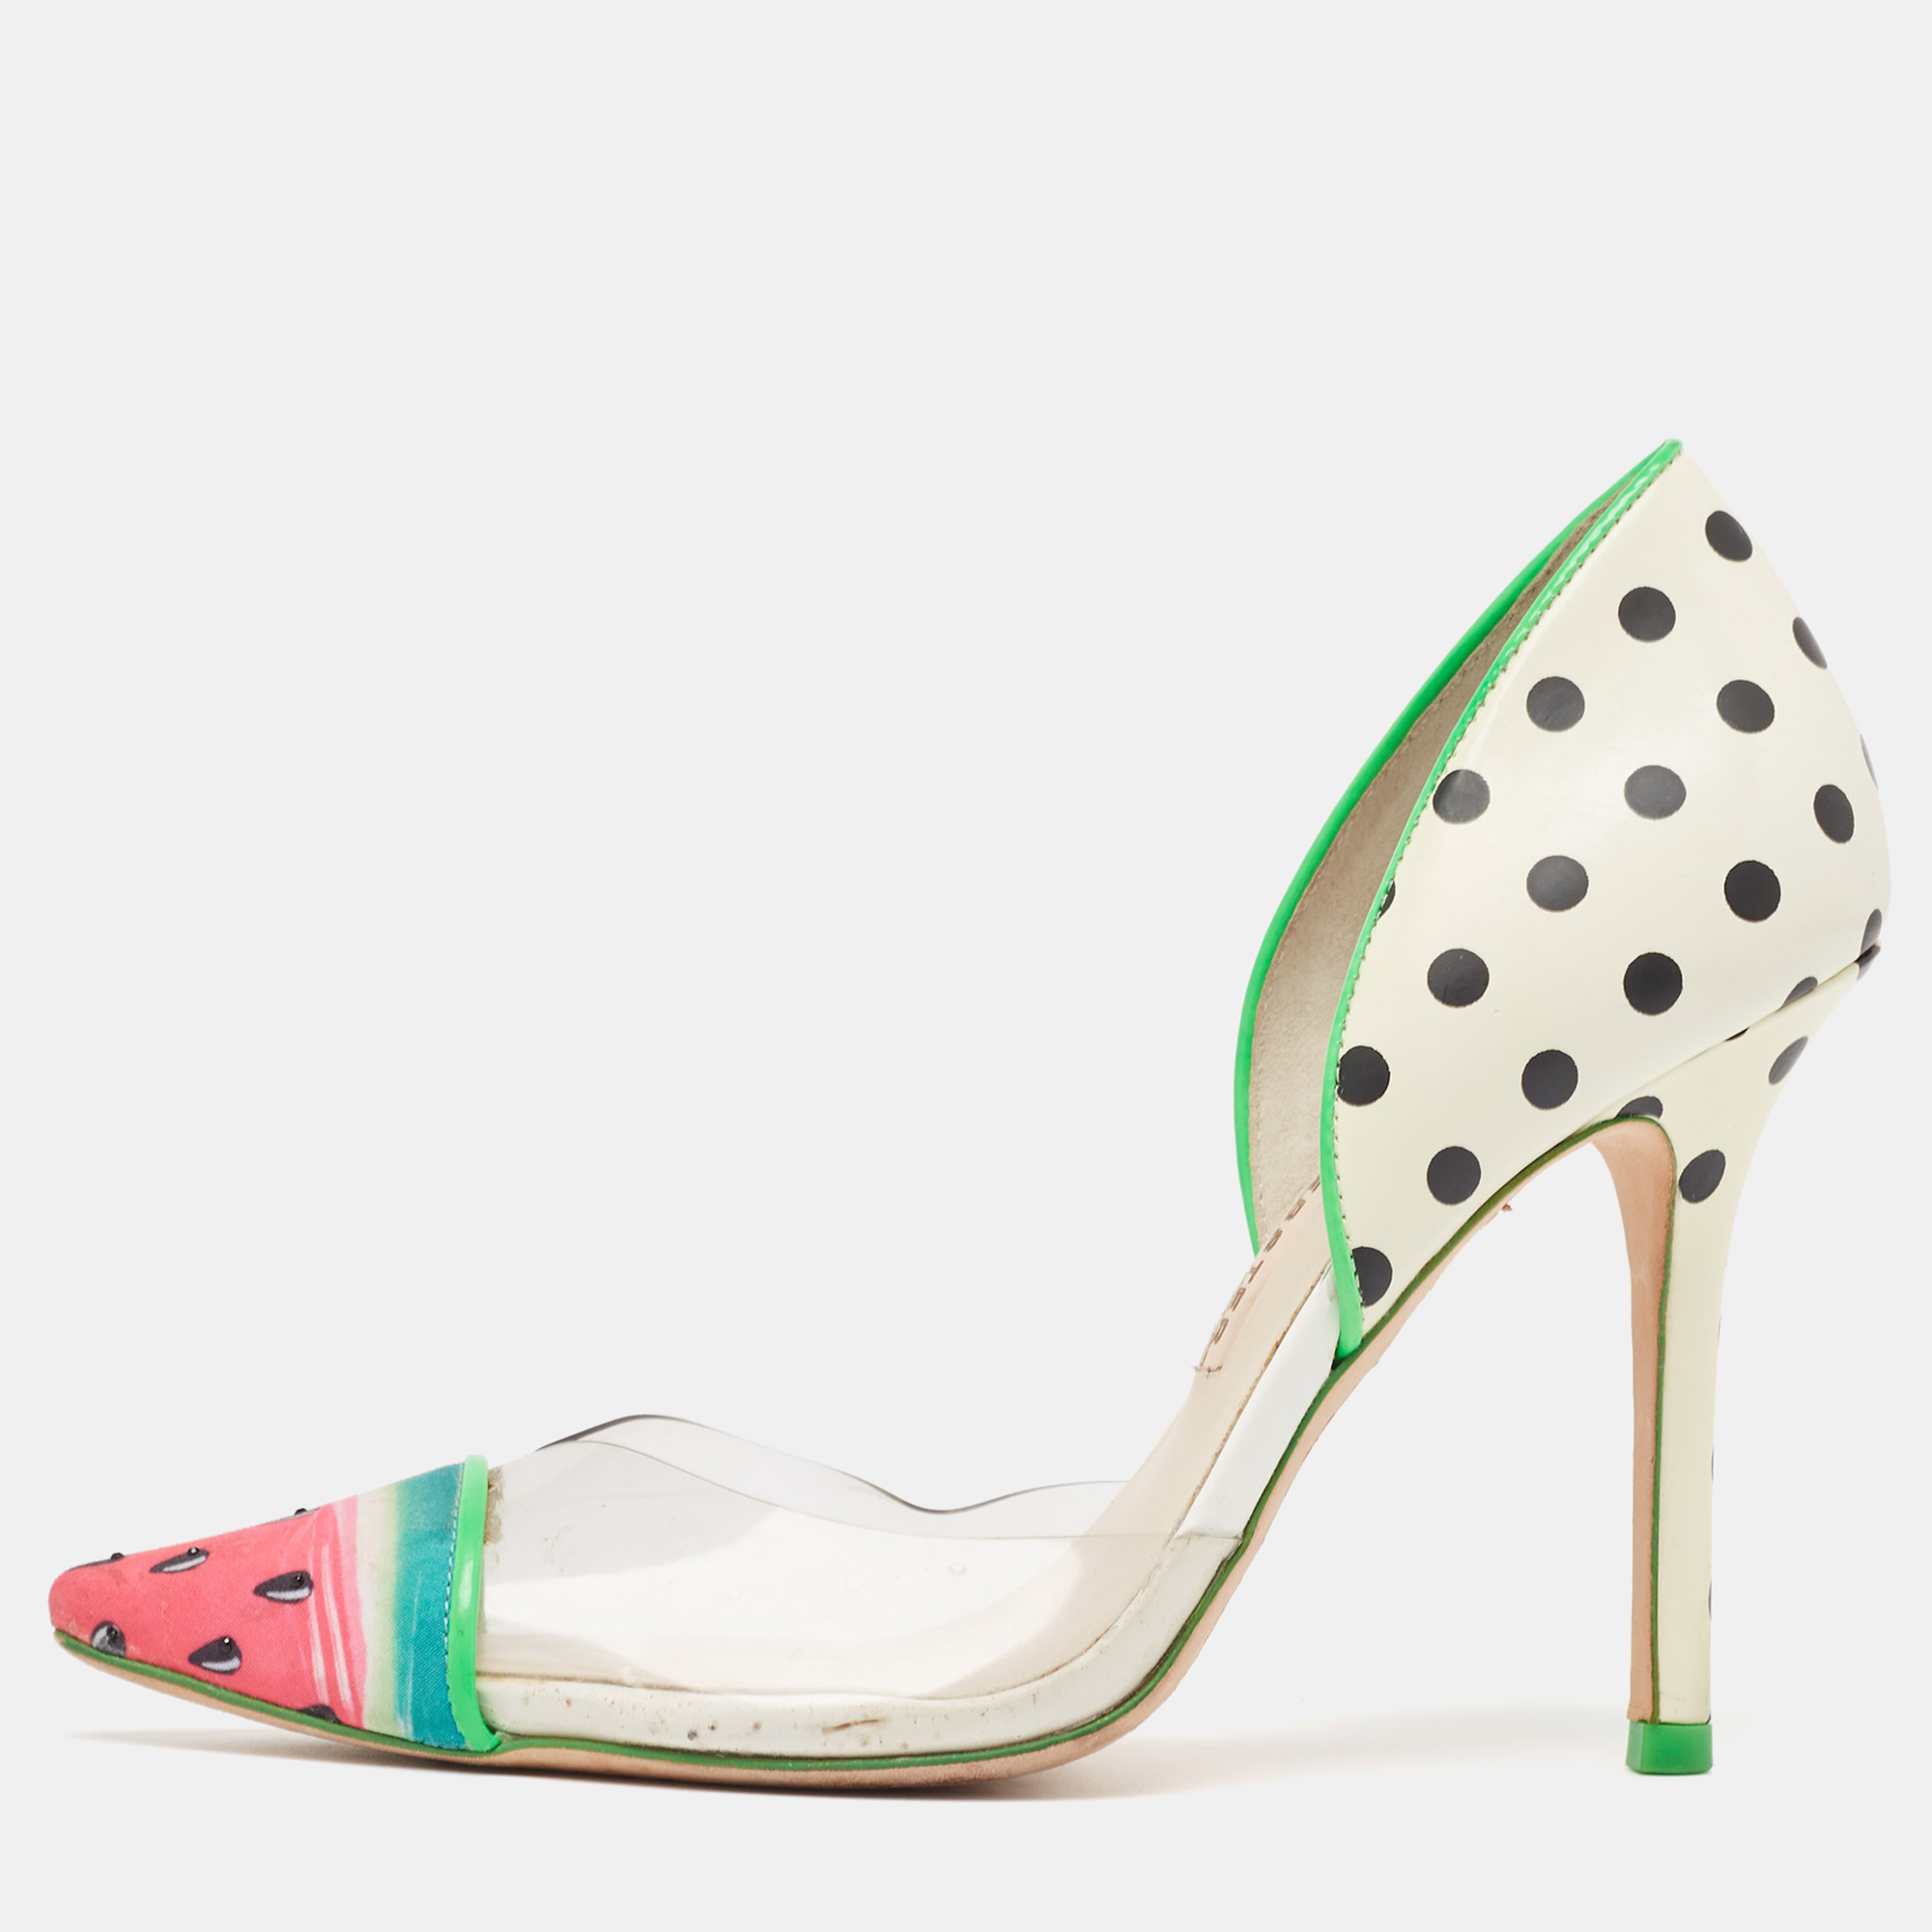 Sophia webster multicolor pvc and patent leather jessica watermelon pumps size 37